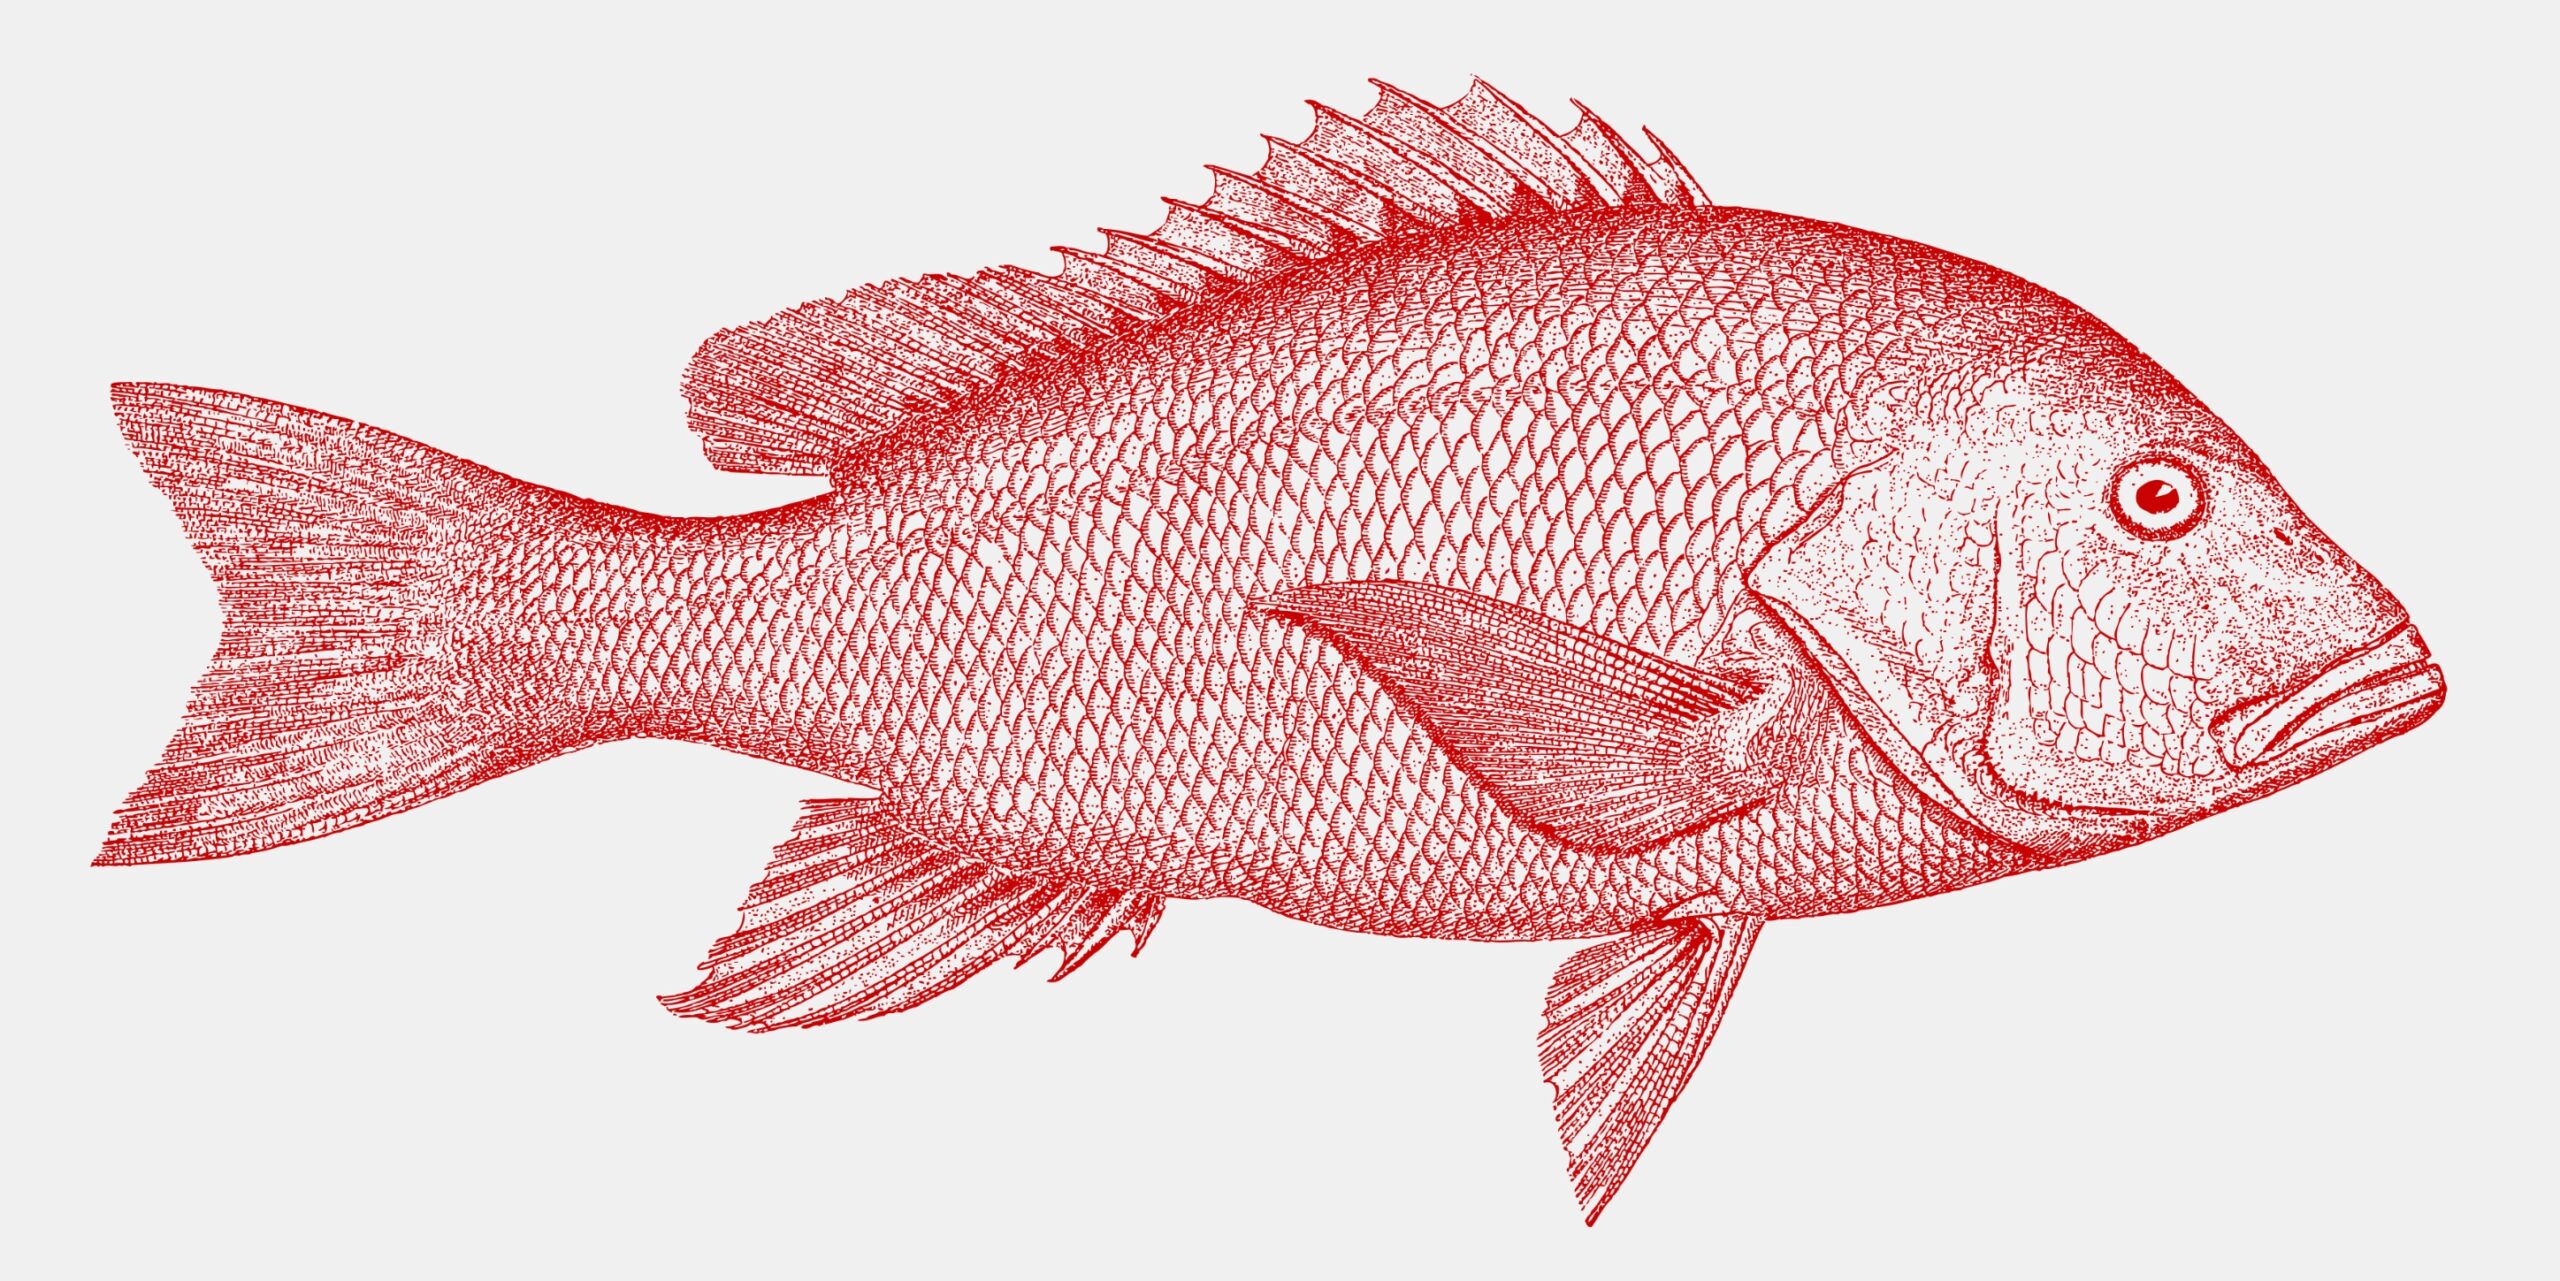 Northern Red Snapper